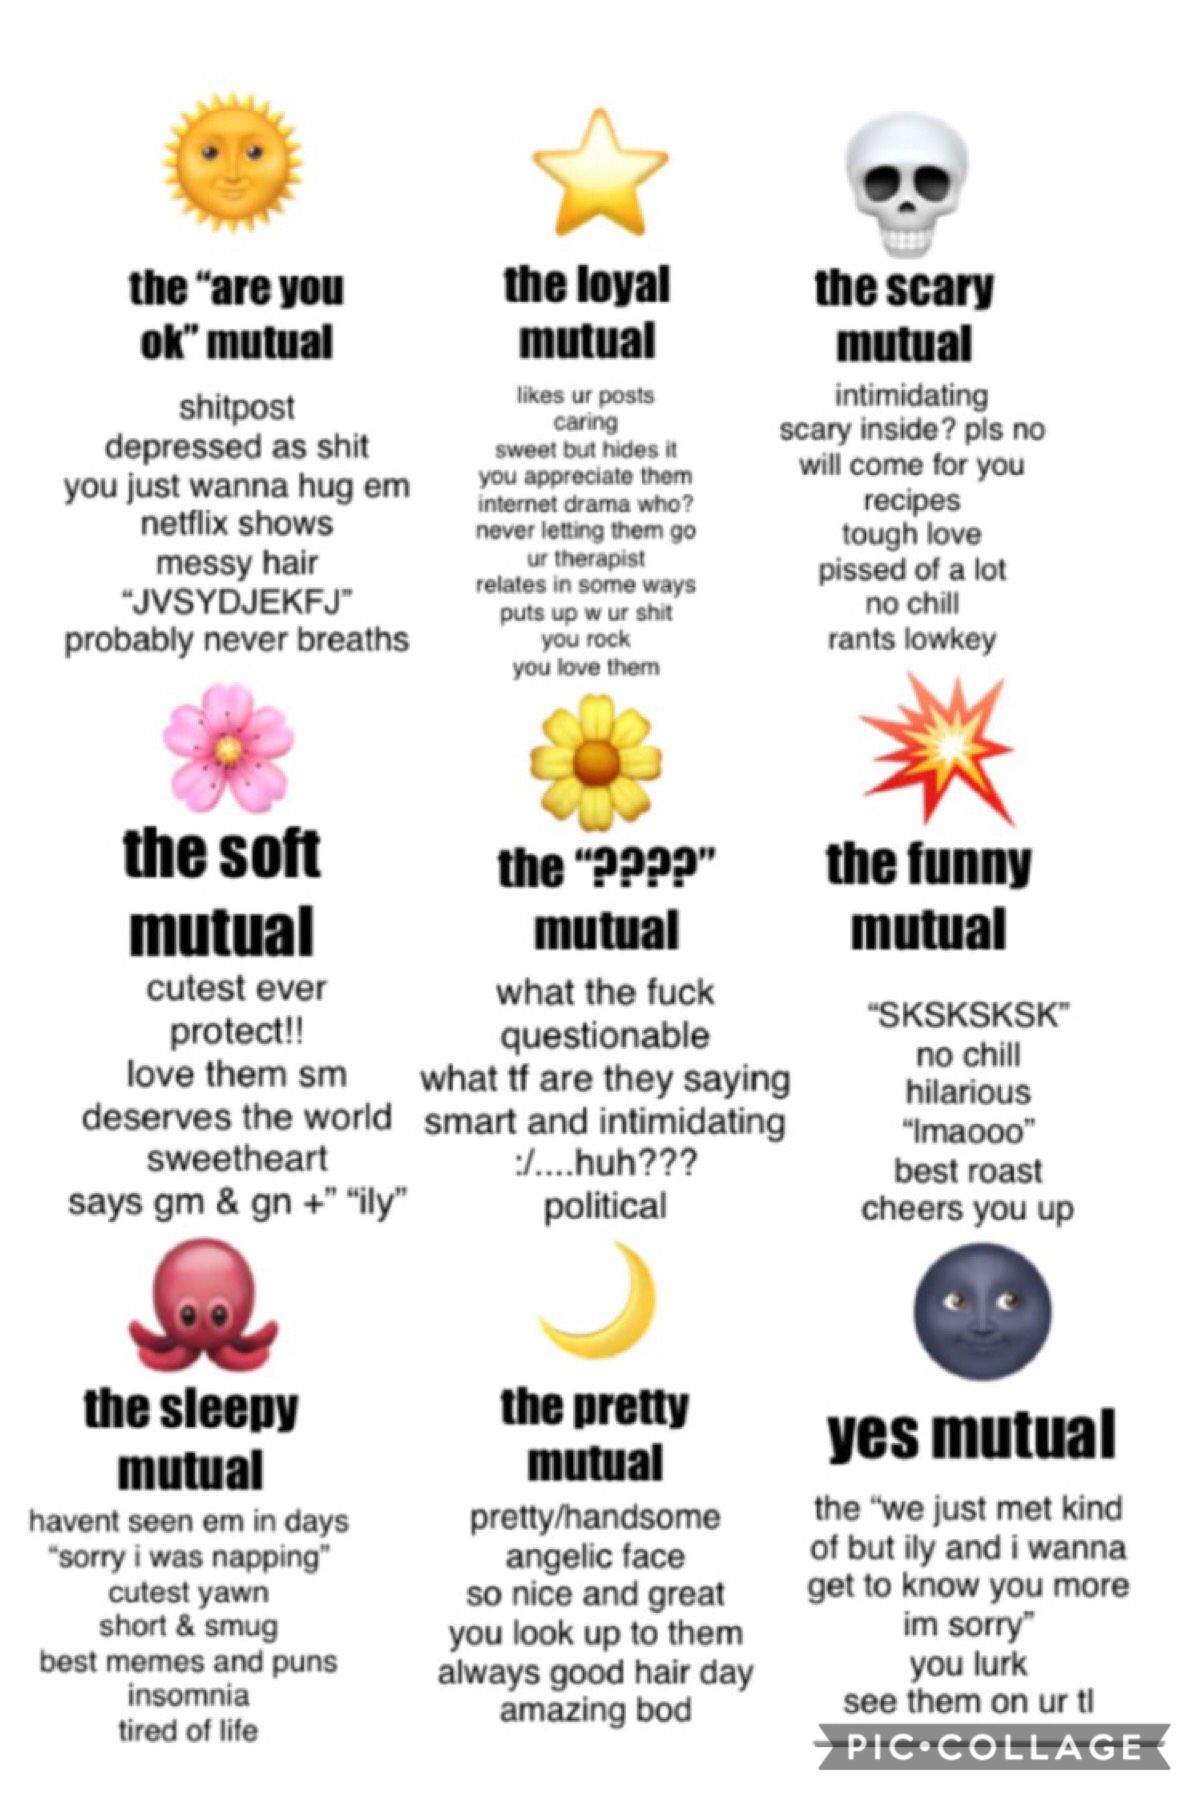 i rlly wanna know - what kind of mUtUaL am i? (credit to @oofsehun)